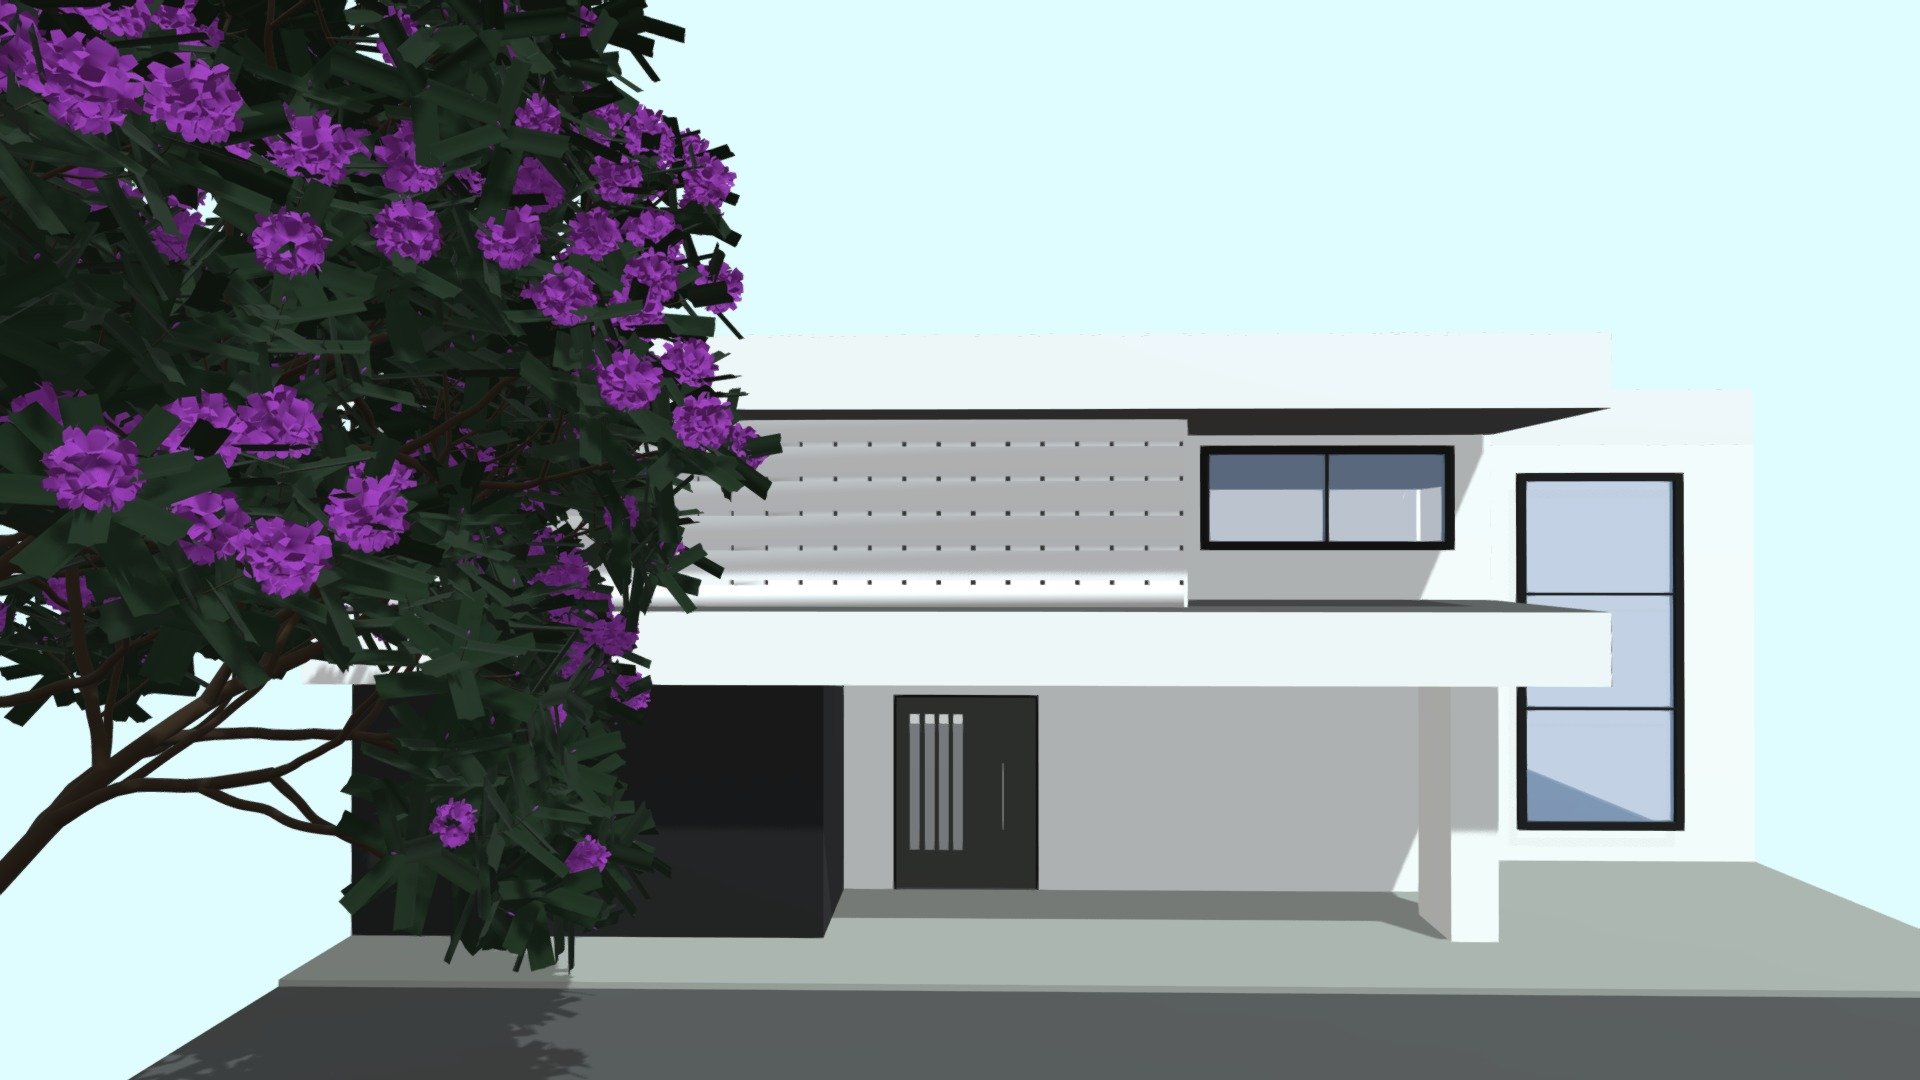 DESIGNED IN SKETCHUP - (FREE) MODERN HOUSE 2 - SKETCHUP DESIGN - 3D model by NIXO (@nixo_design) 3d model